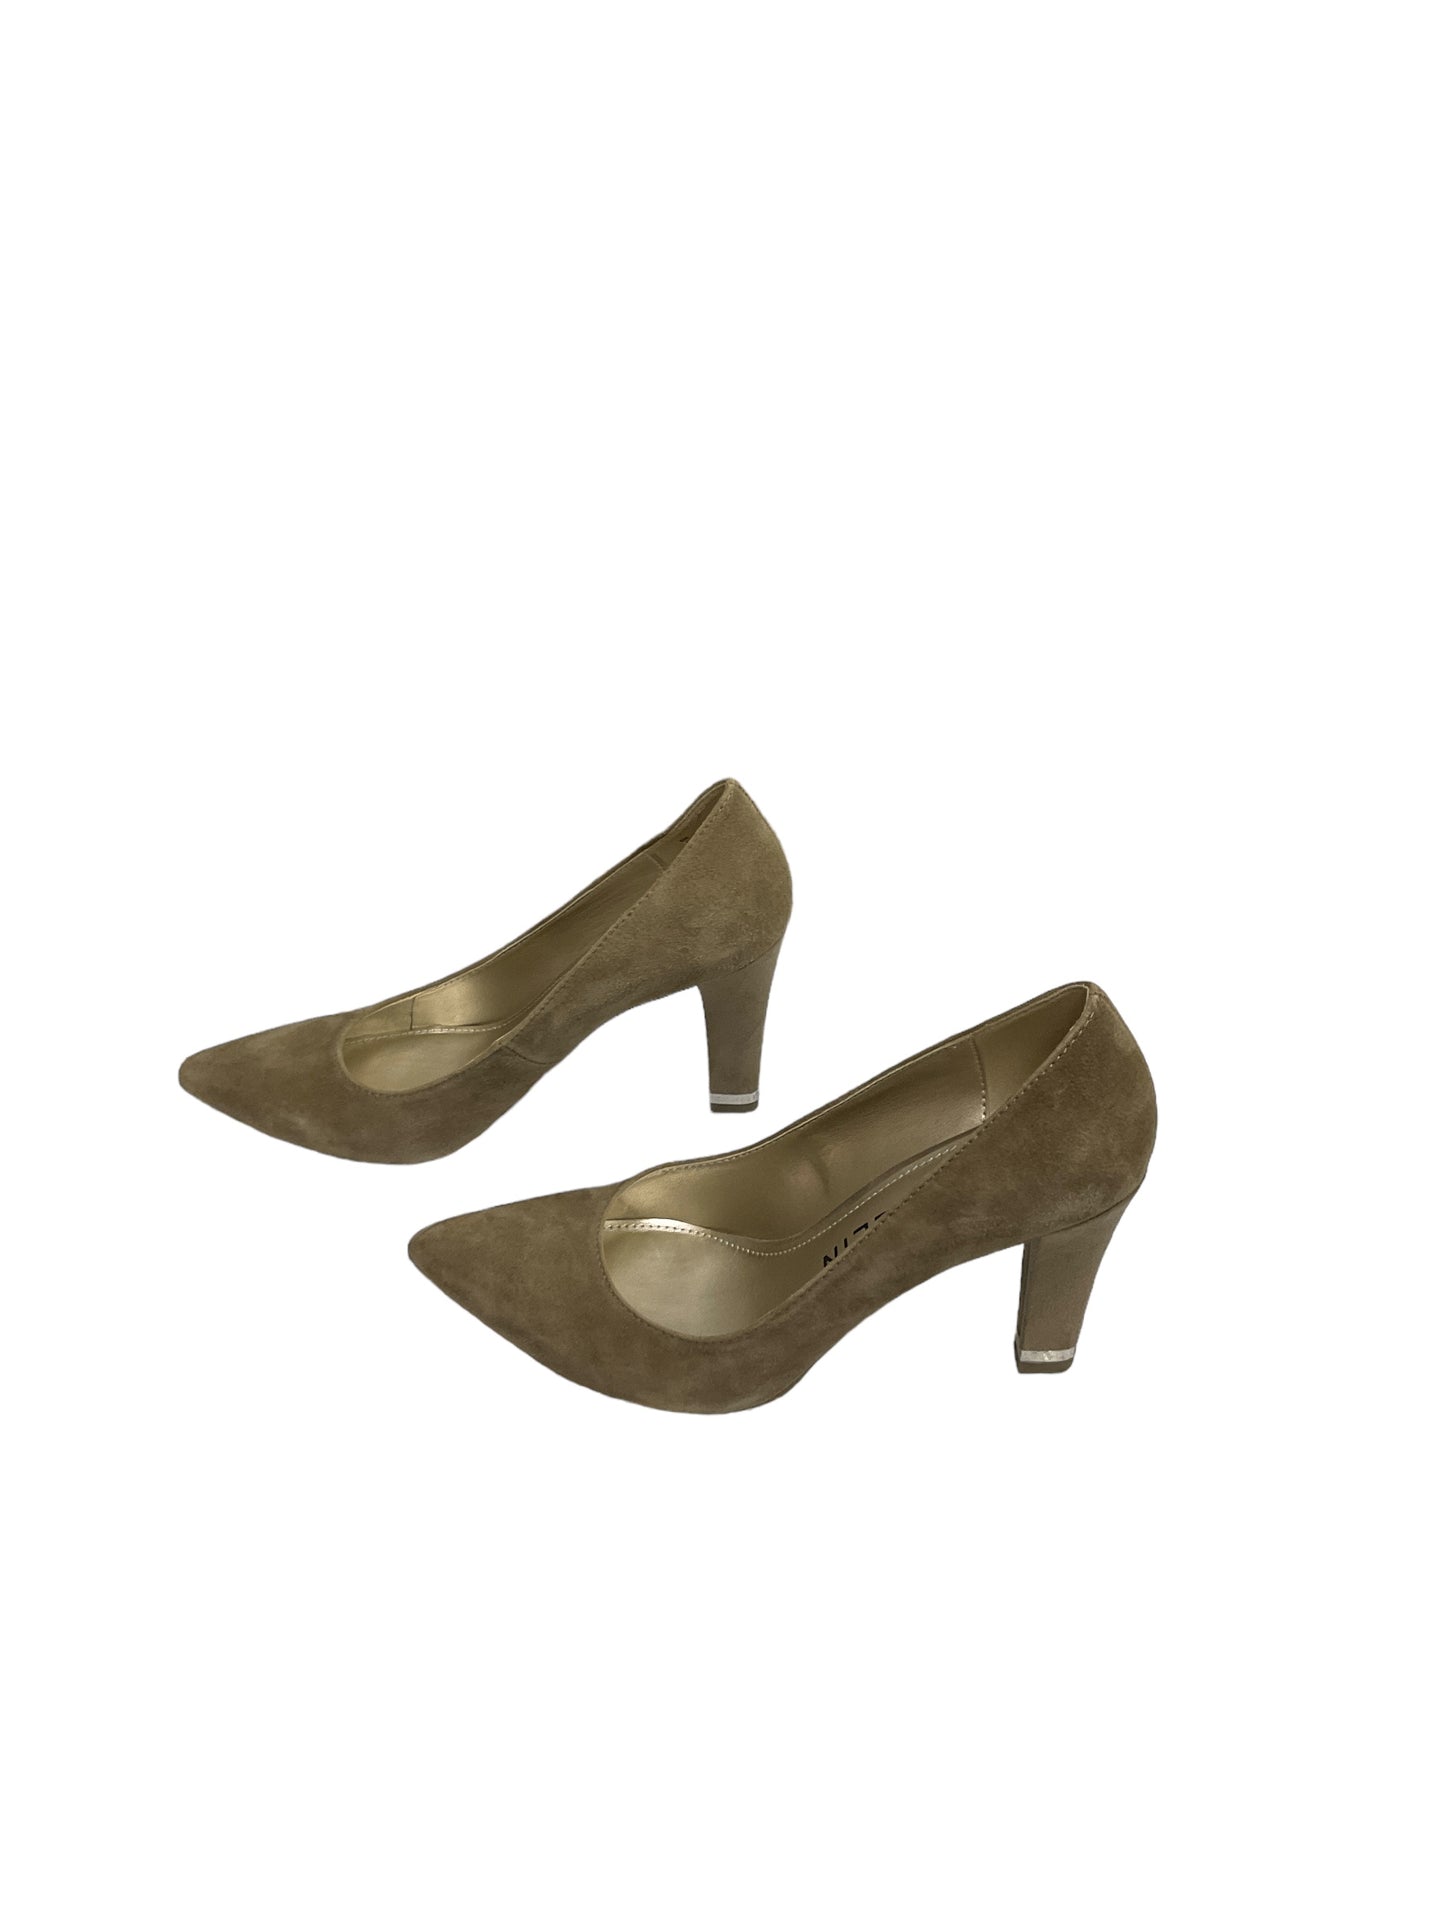 Shoes Heels D Orsay By Anne Klein  Size: 8